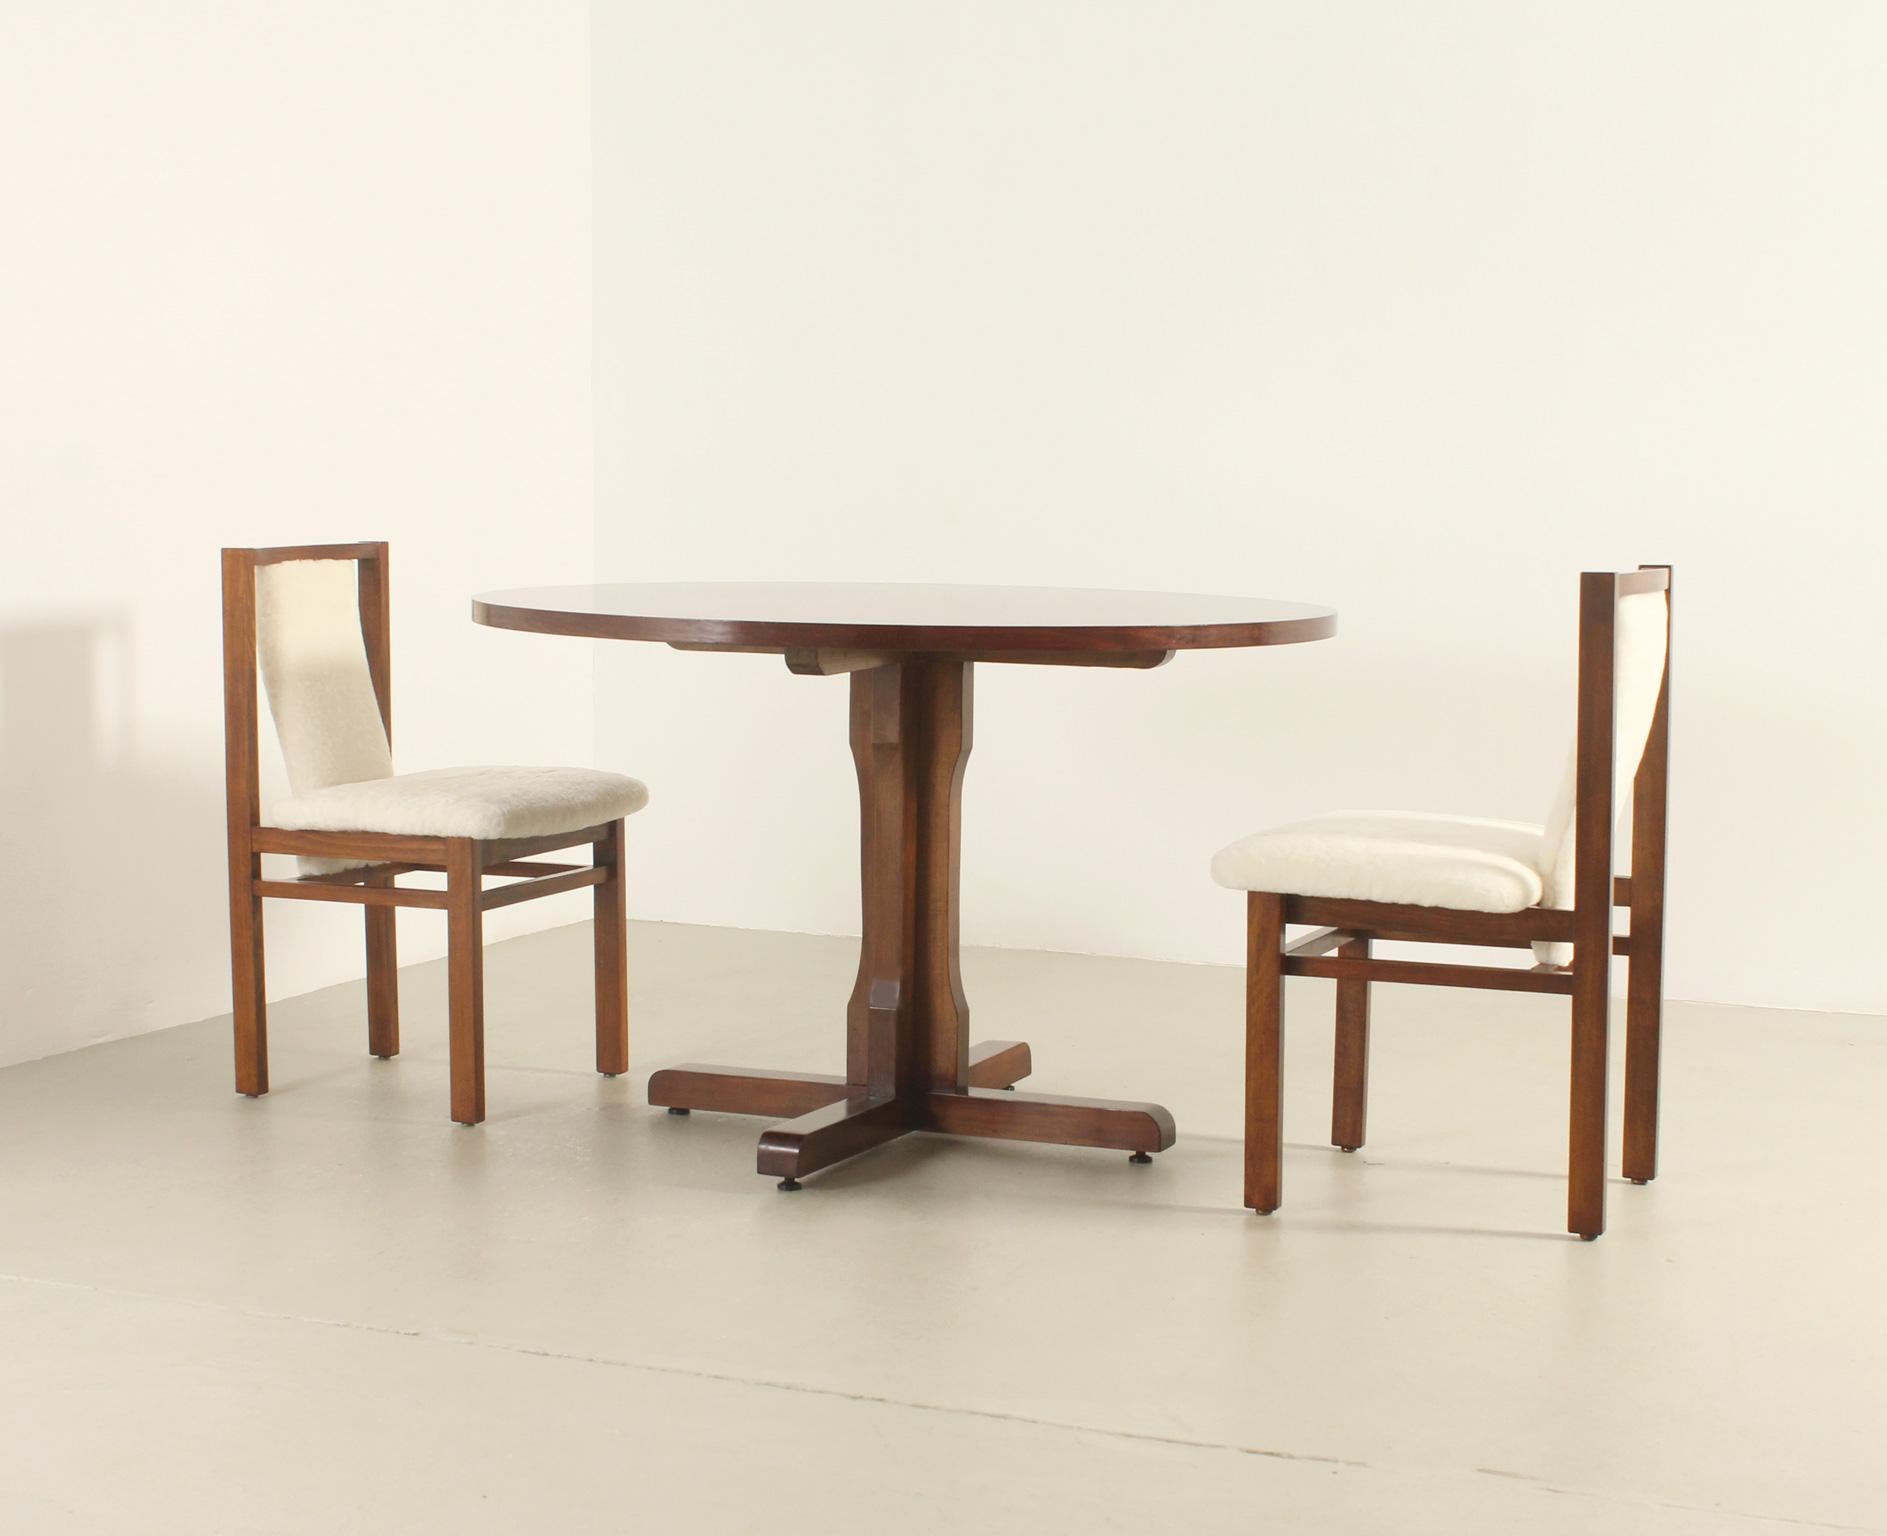 Four Dining Chairs by Jordi Vilanova in Oak Wood and Sheepskin, Spain, 1960's For Sale 2